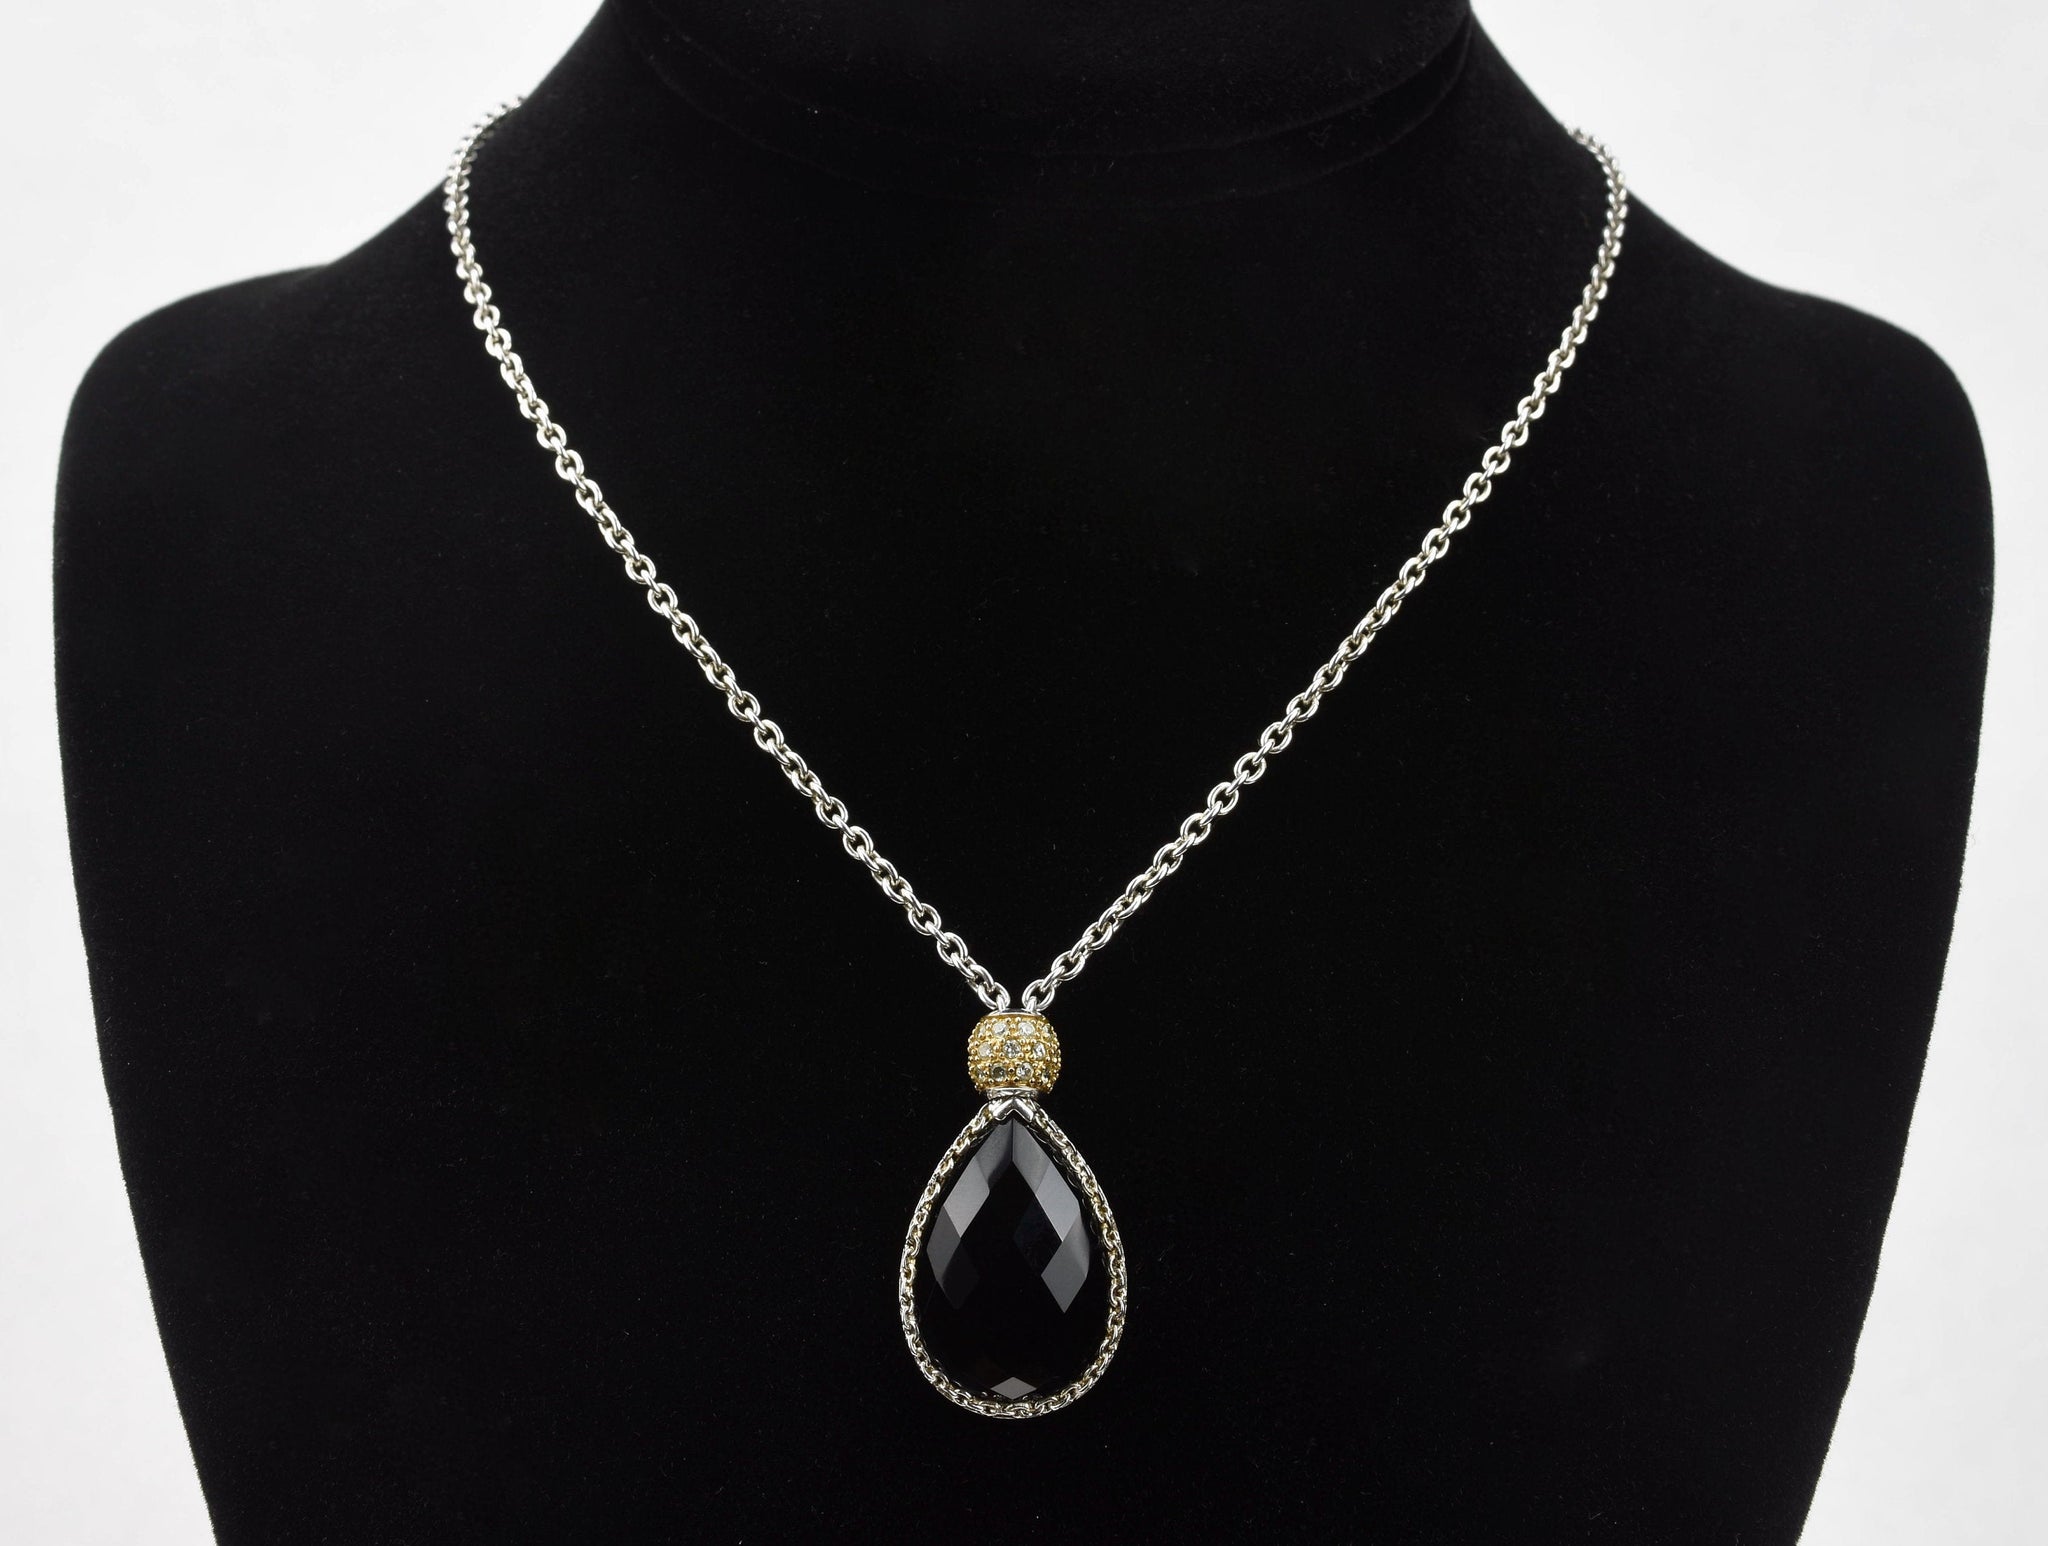 Black Onyx Sterling Silver Cubic Zirconia Pendant Chain Necklace